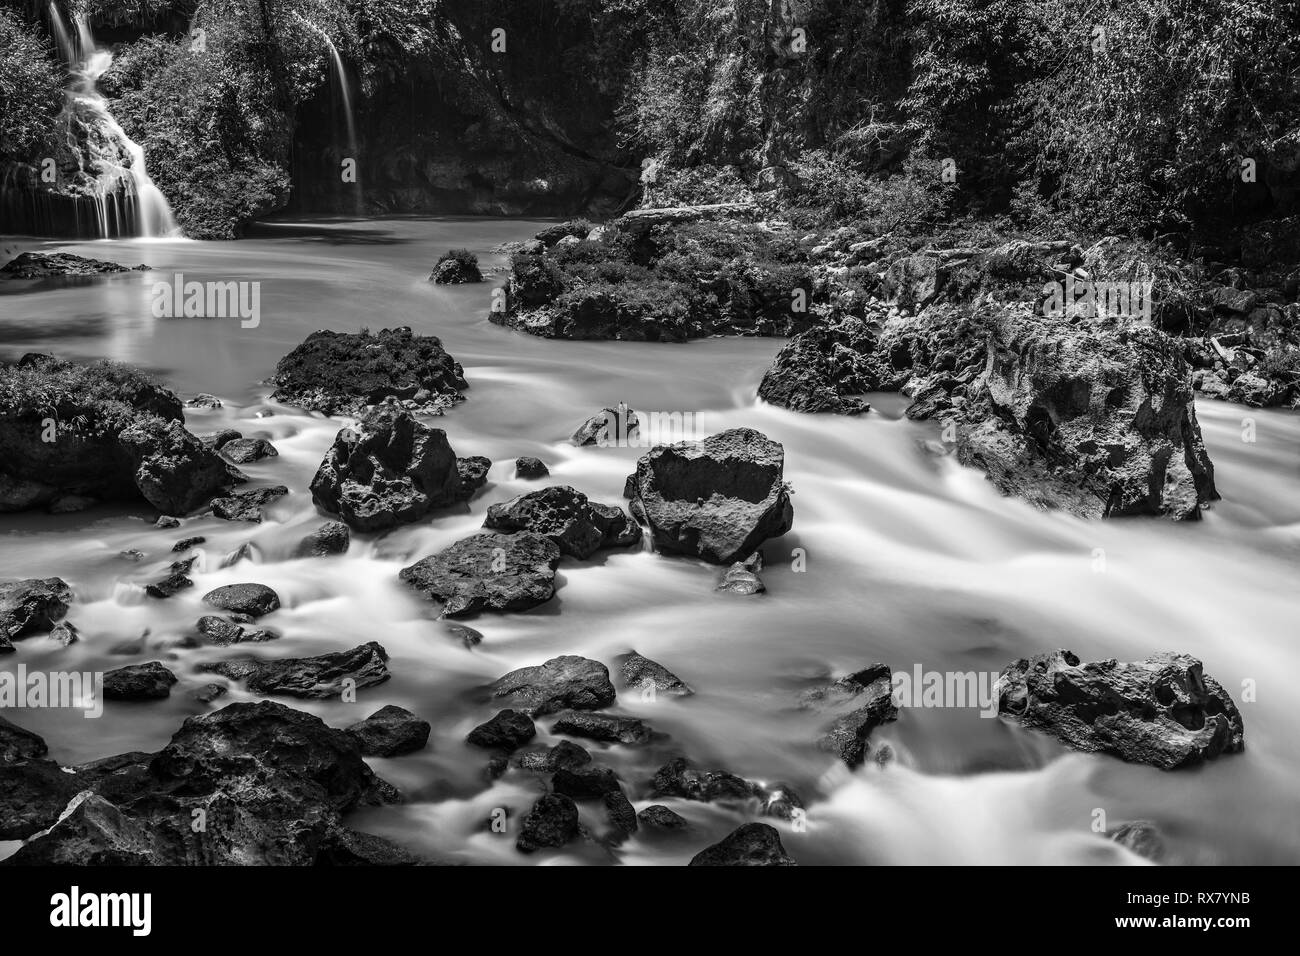 Black and white photograph of the Semuc Champey Cascades in the tropical rainforest of the Peten jungle of Guatemala, Central America. Stock Photo